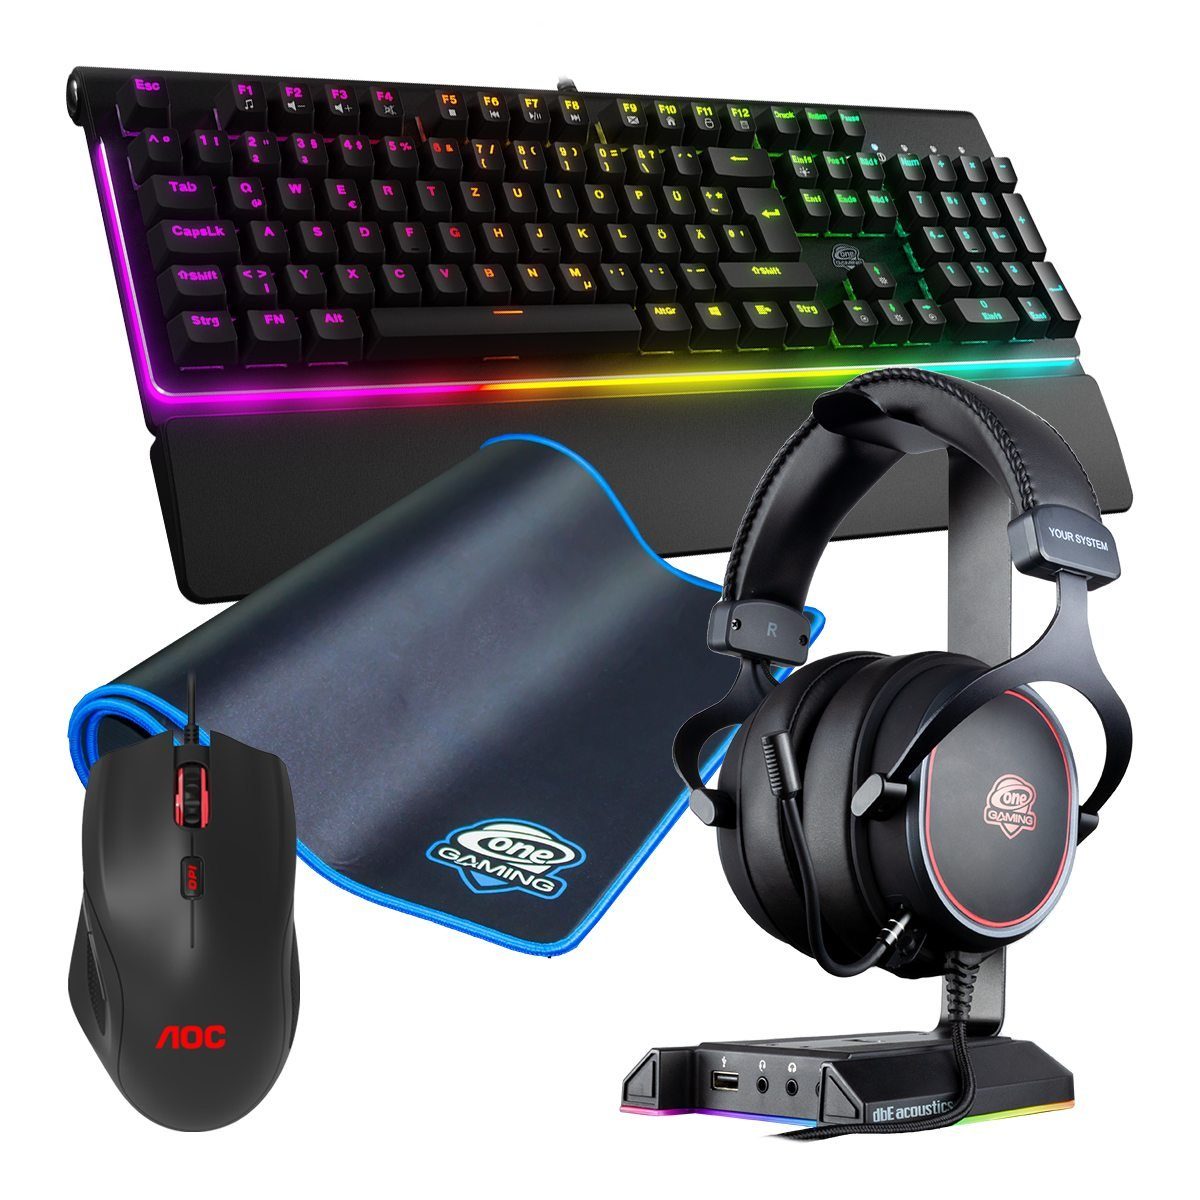 ONE GAMING ONE GAMING Ultimate Bundle 02 Tastatur-, Maus- und Mauspad-Set,  Elektronisches Noise Cancelling, RGB-Beleuchtung